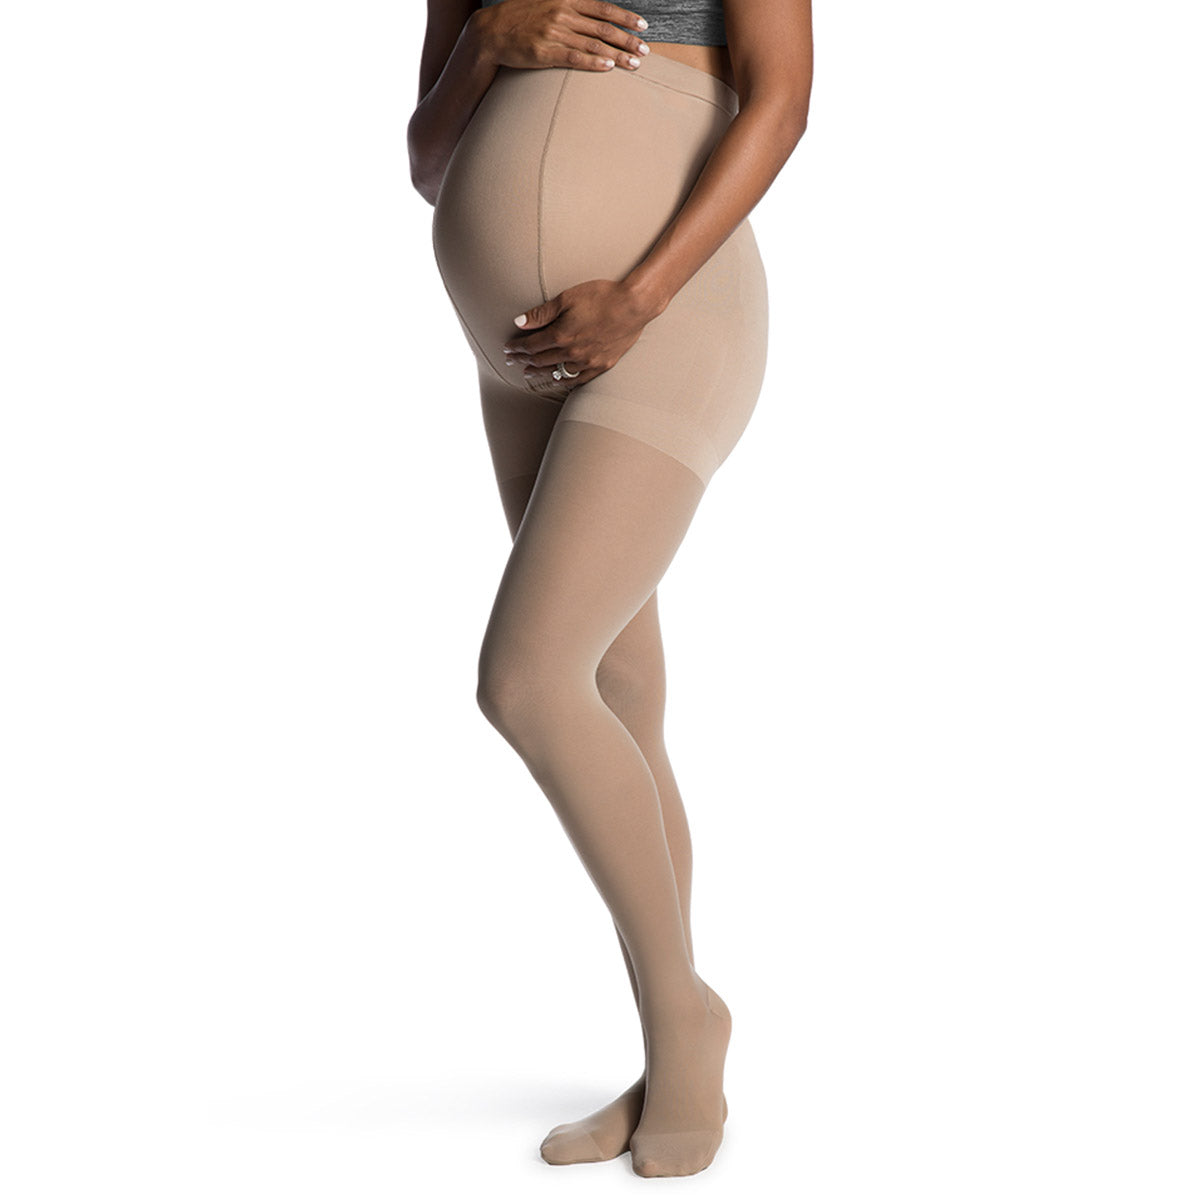 Maternity Pantyhose sheer Hosiery Maternity Tights Maternity Support  Stockings